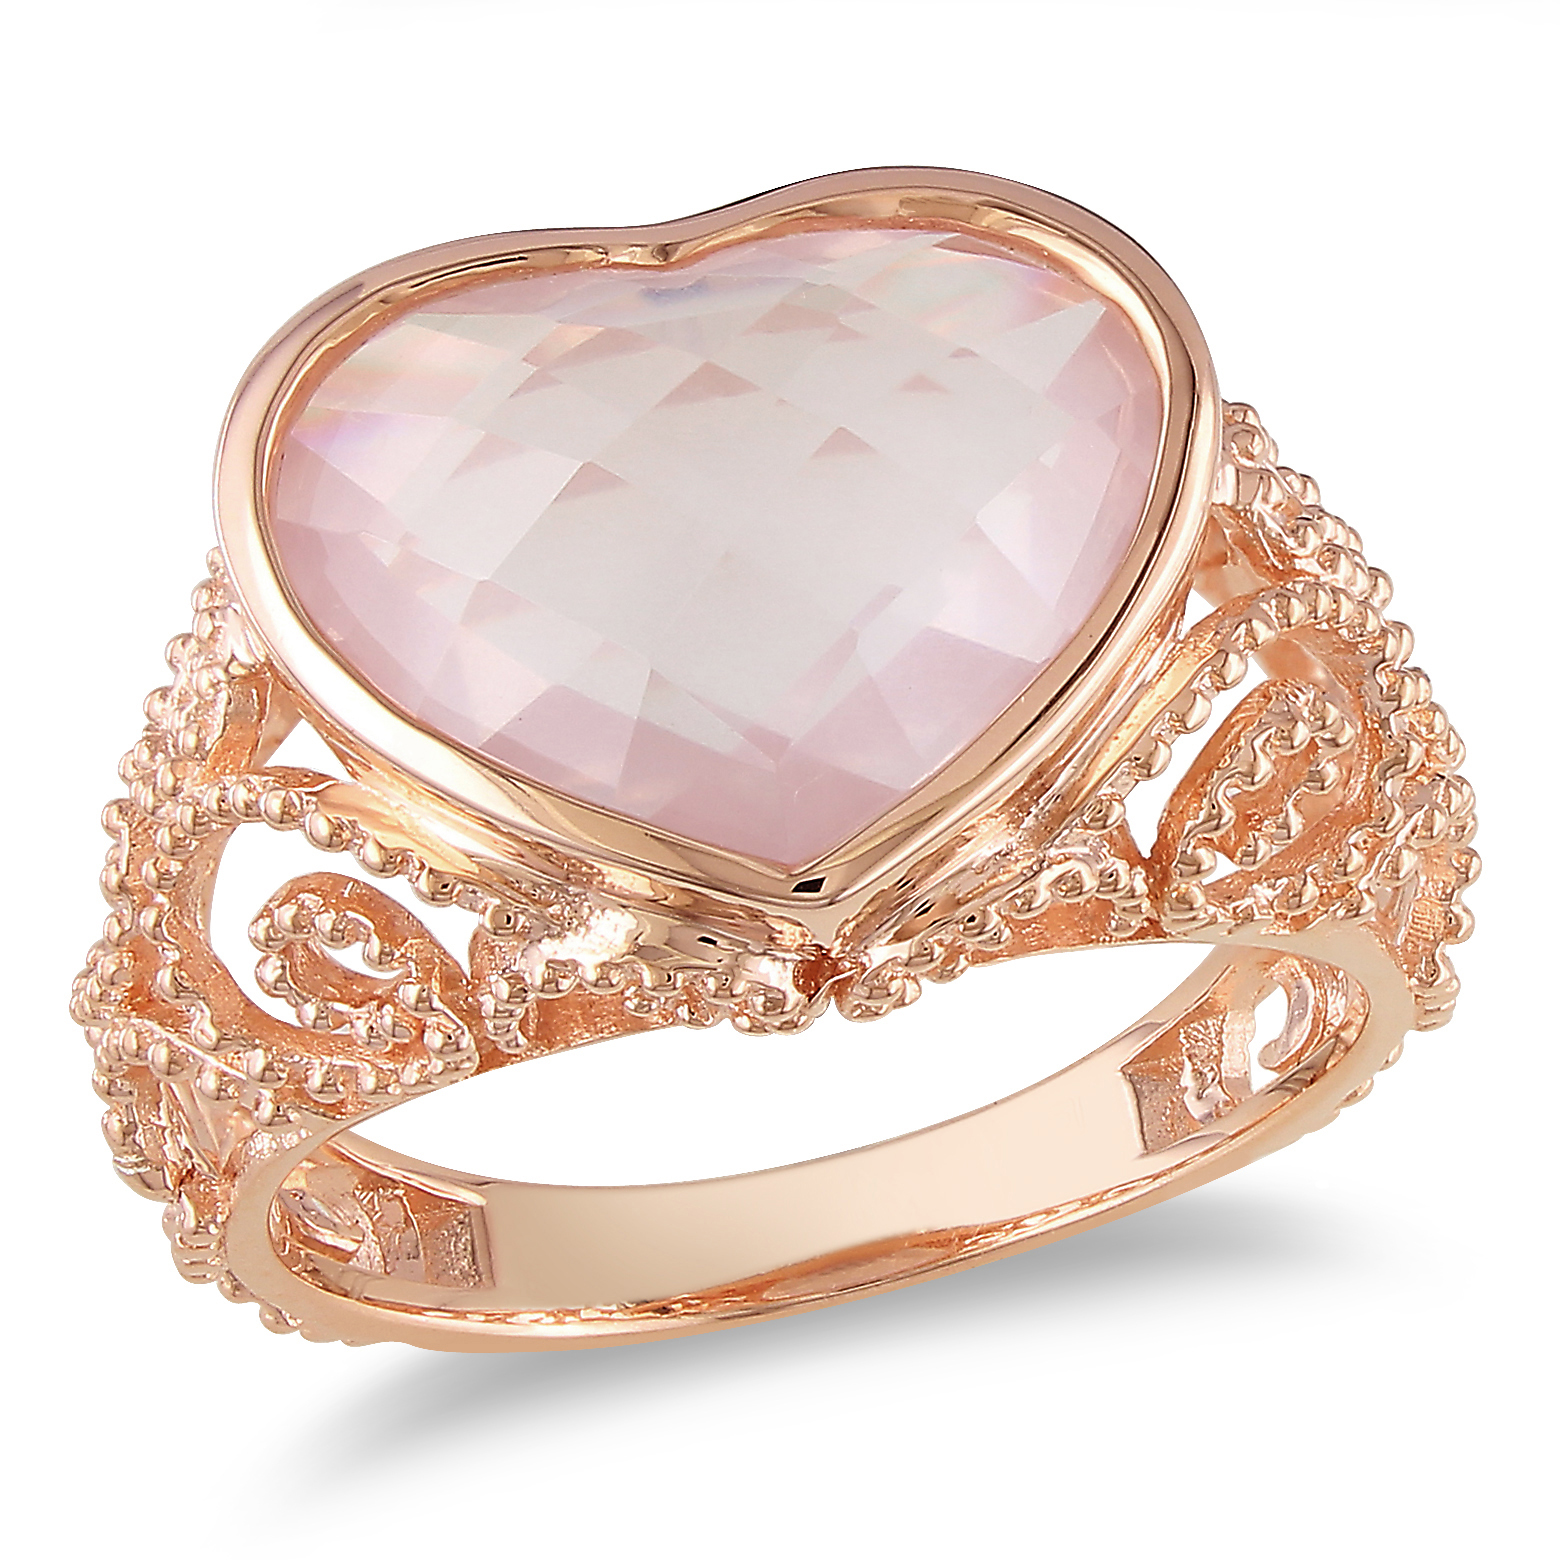 6 1/2 Carat T.G.W. Rose Quartz Fashion Ring Pink Sterling Silver Pink Plated